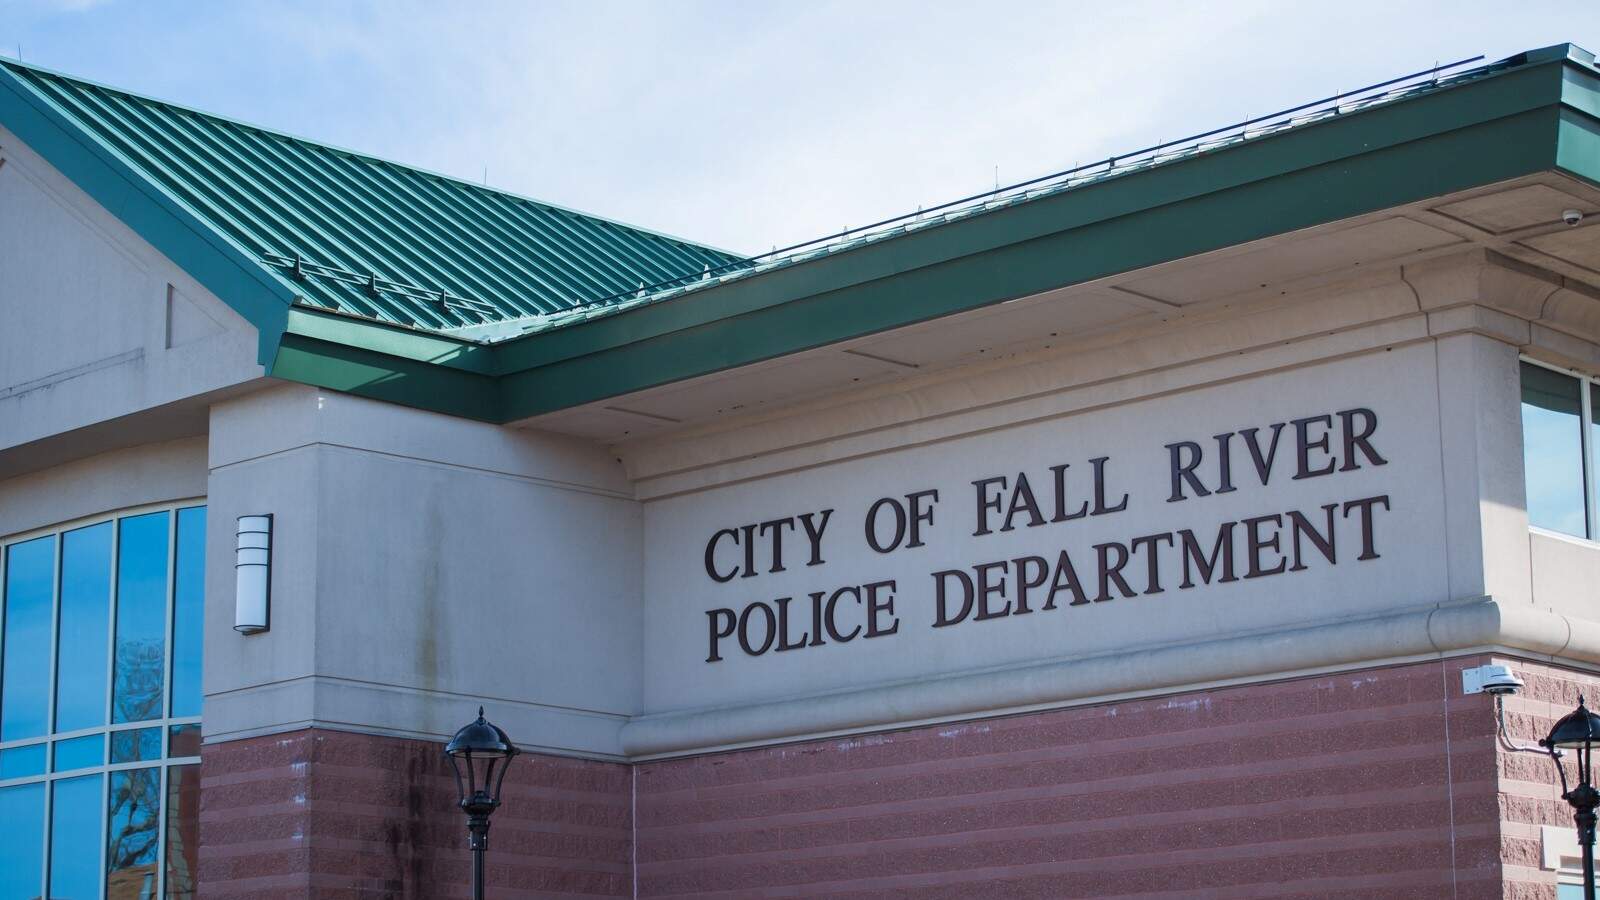 The outside of the Fall River police department.(Gretchen Ertl via The Public's Radio)